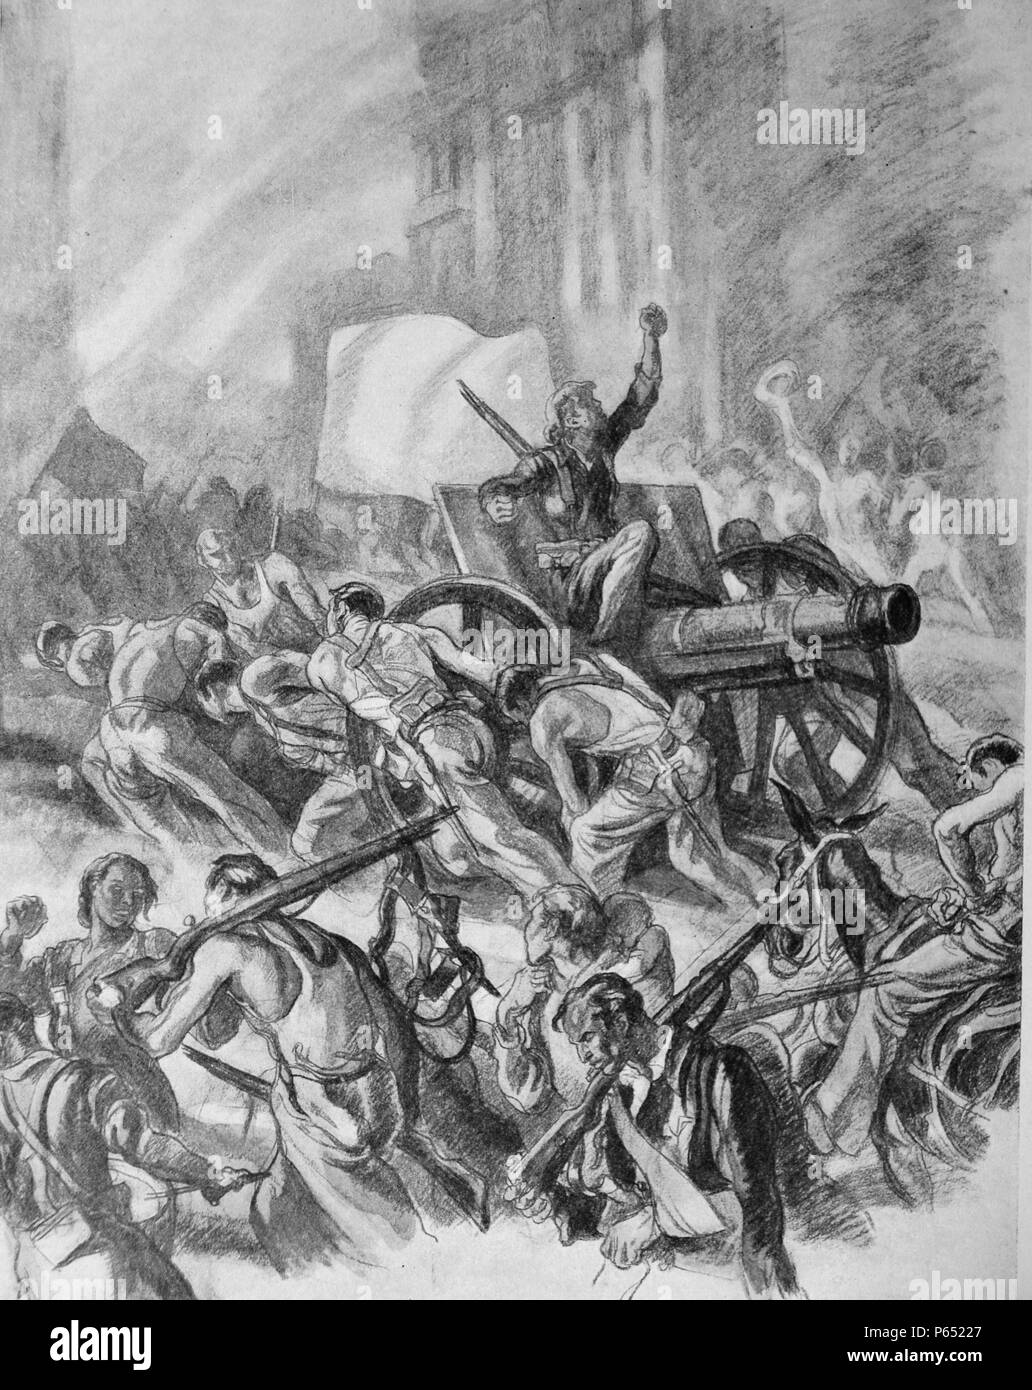 anarchy and mayhem carried out by republicans during the Spanish Civil war. Propaganda illustration by Carlos SÃ¡enz de Tejada Stock Photo